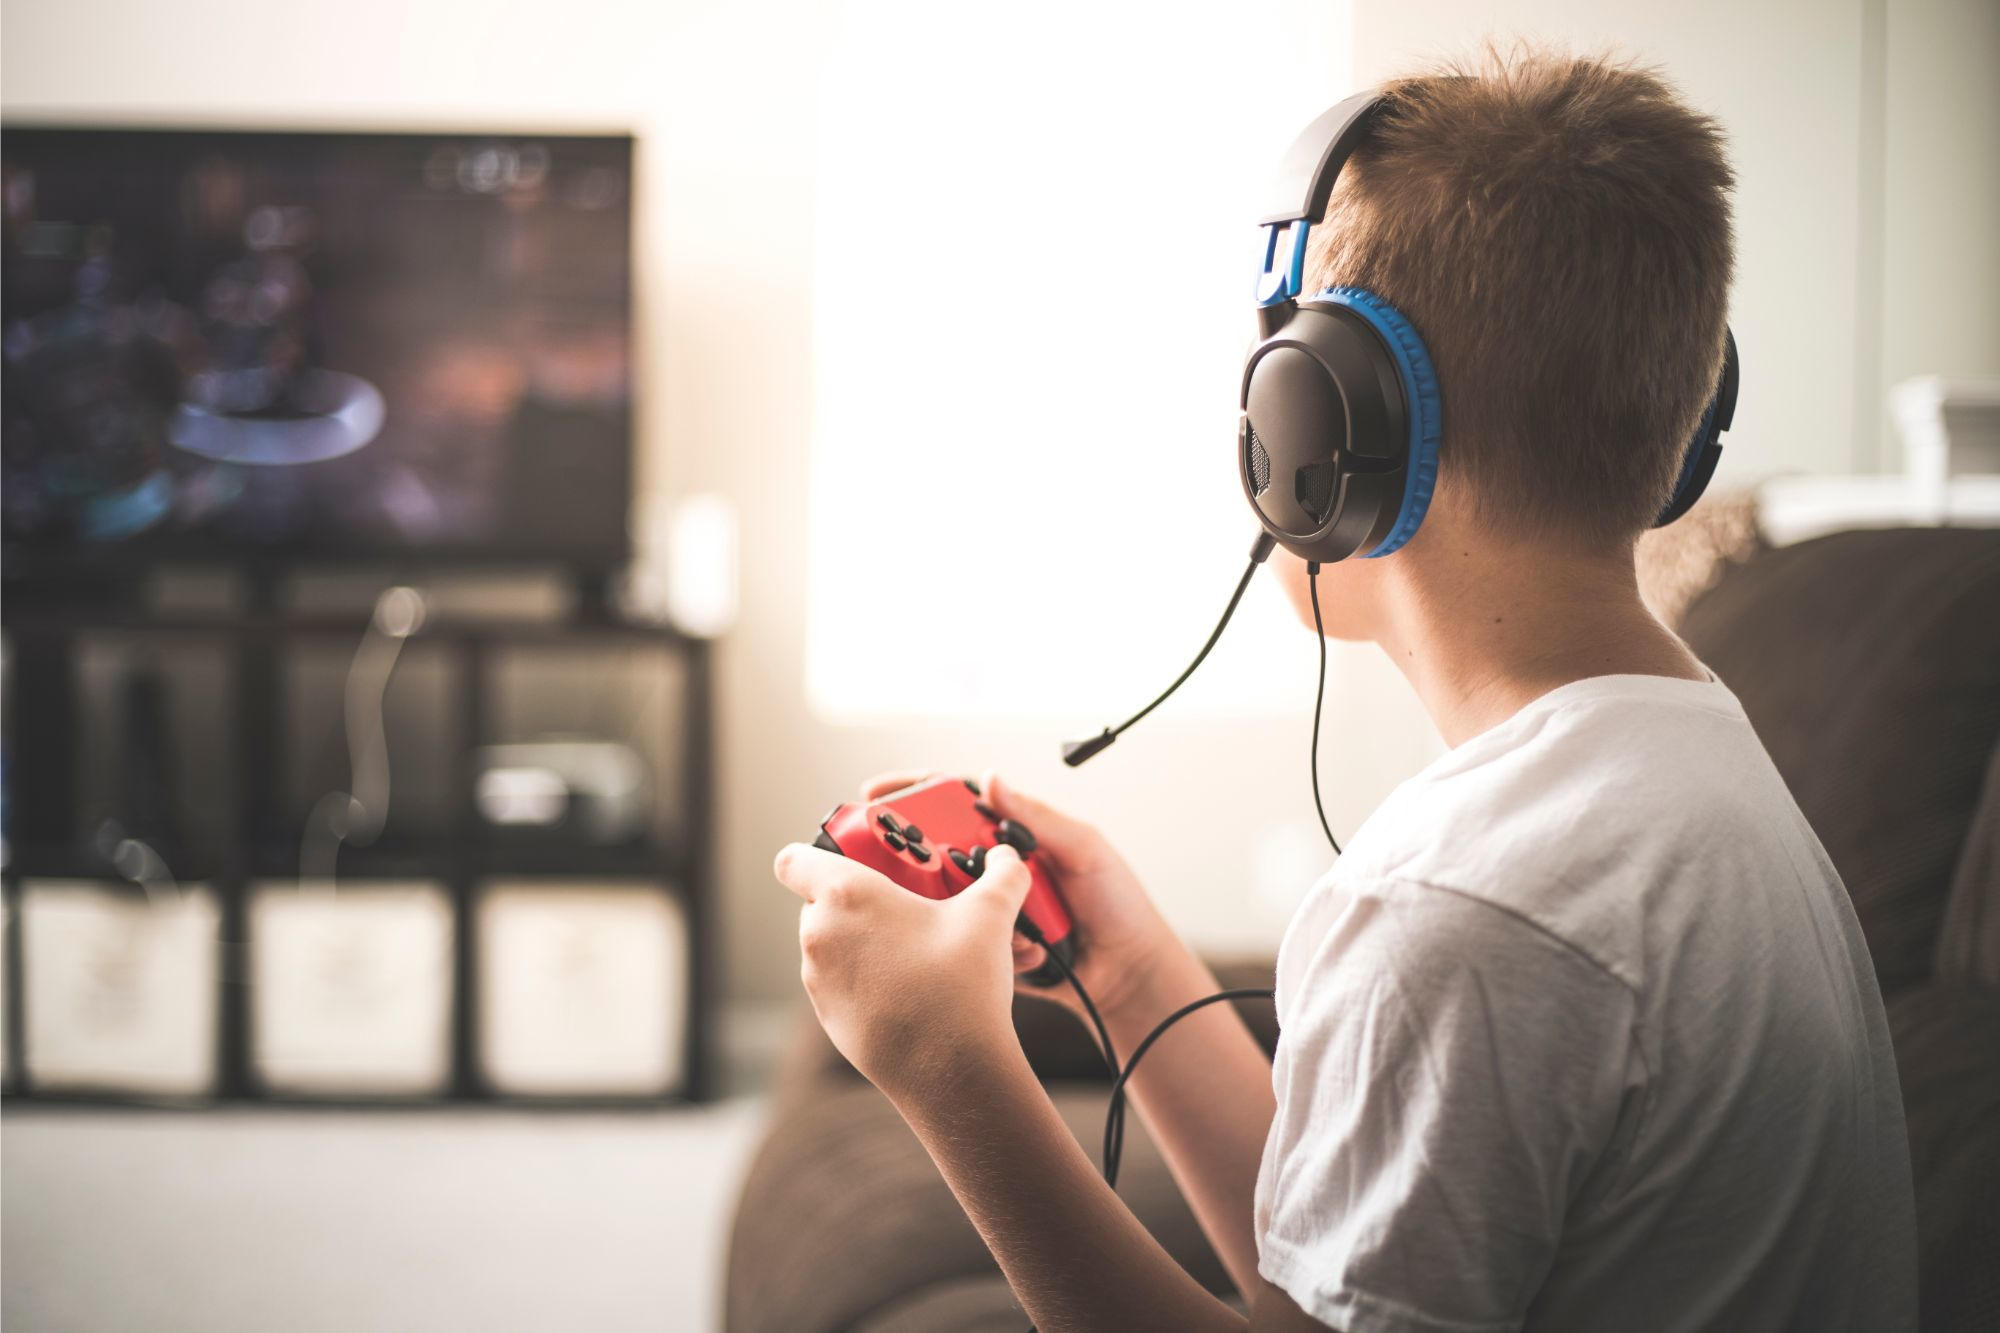 online games kids: How new-age gaming affects your child's mental, physical  and social well-being - The Economic Times